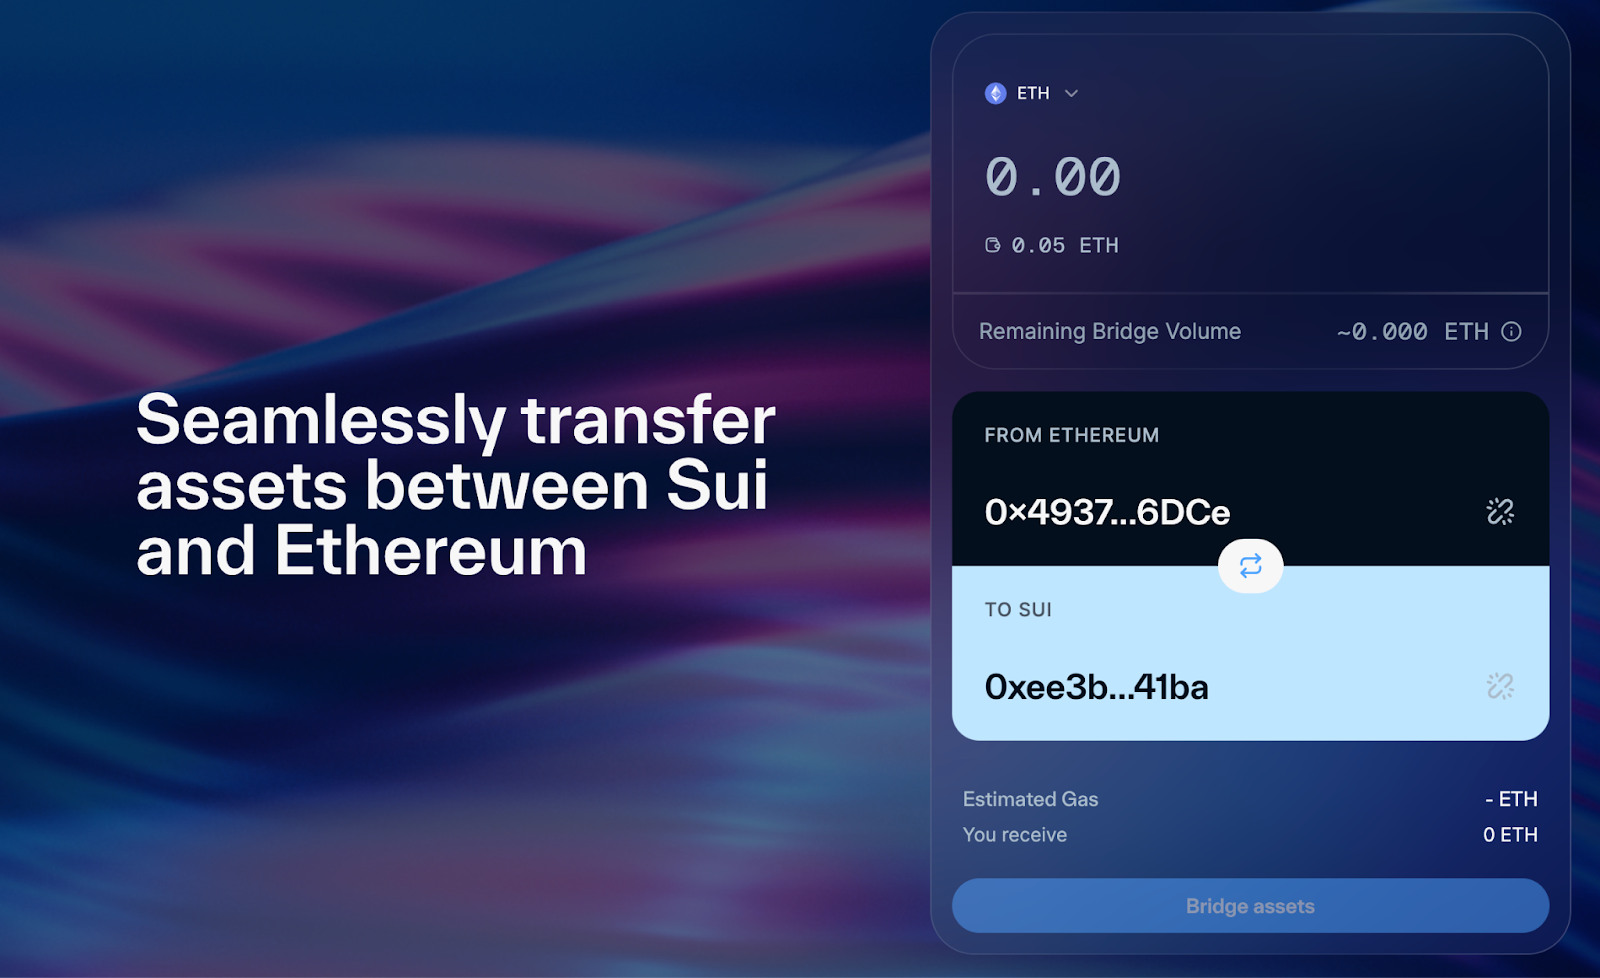 SUI Bridge overview and how to bridge/transfer assets from Ethereum to SUI